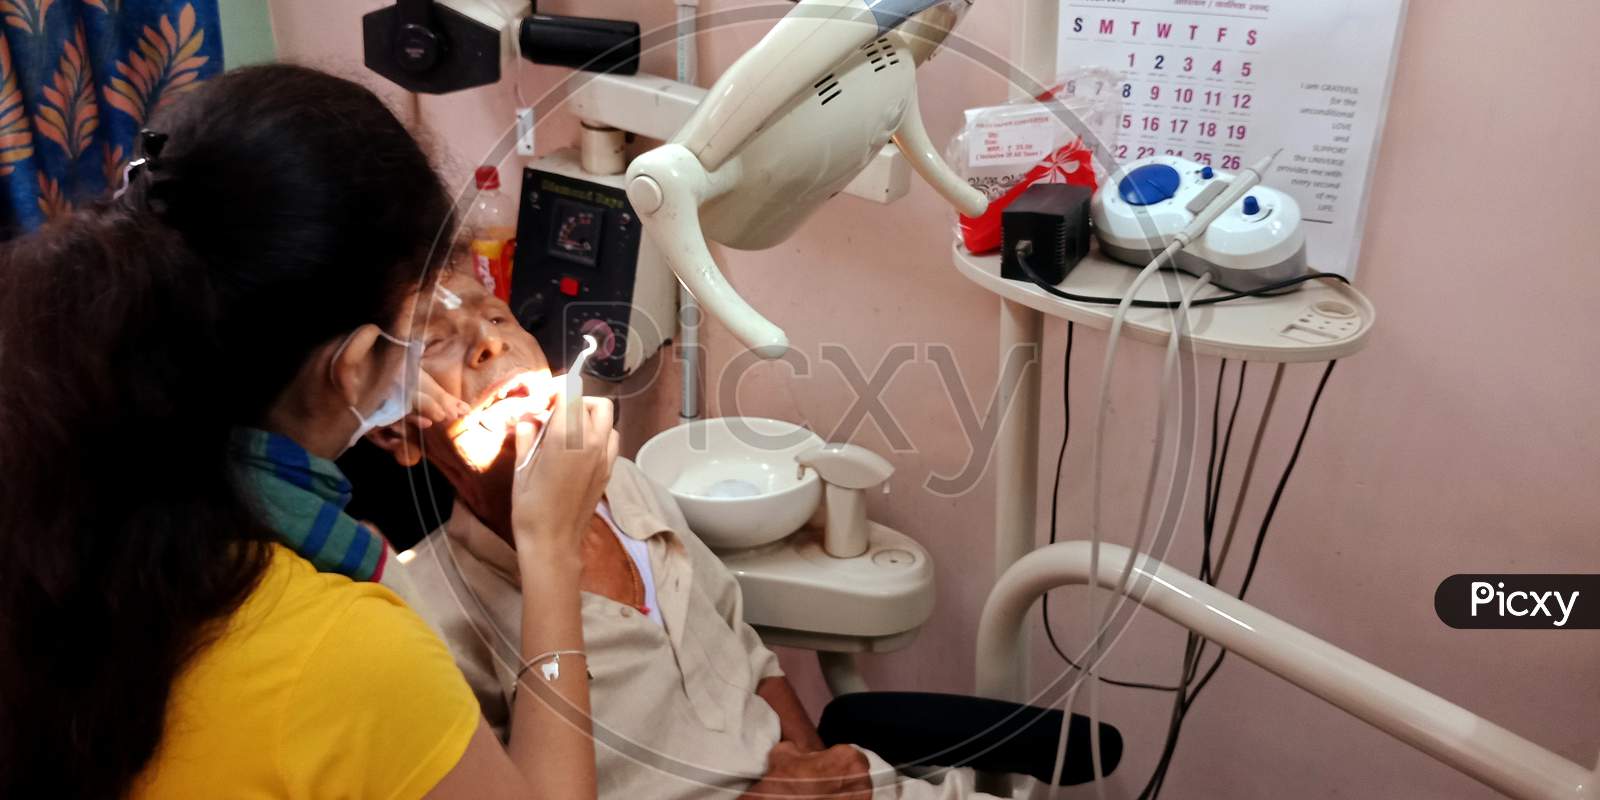 Indian Dental Specialist Doctor Working At Clinic.